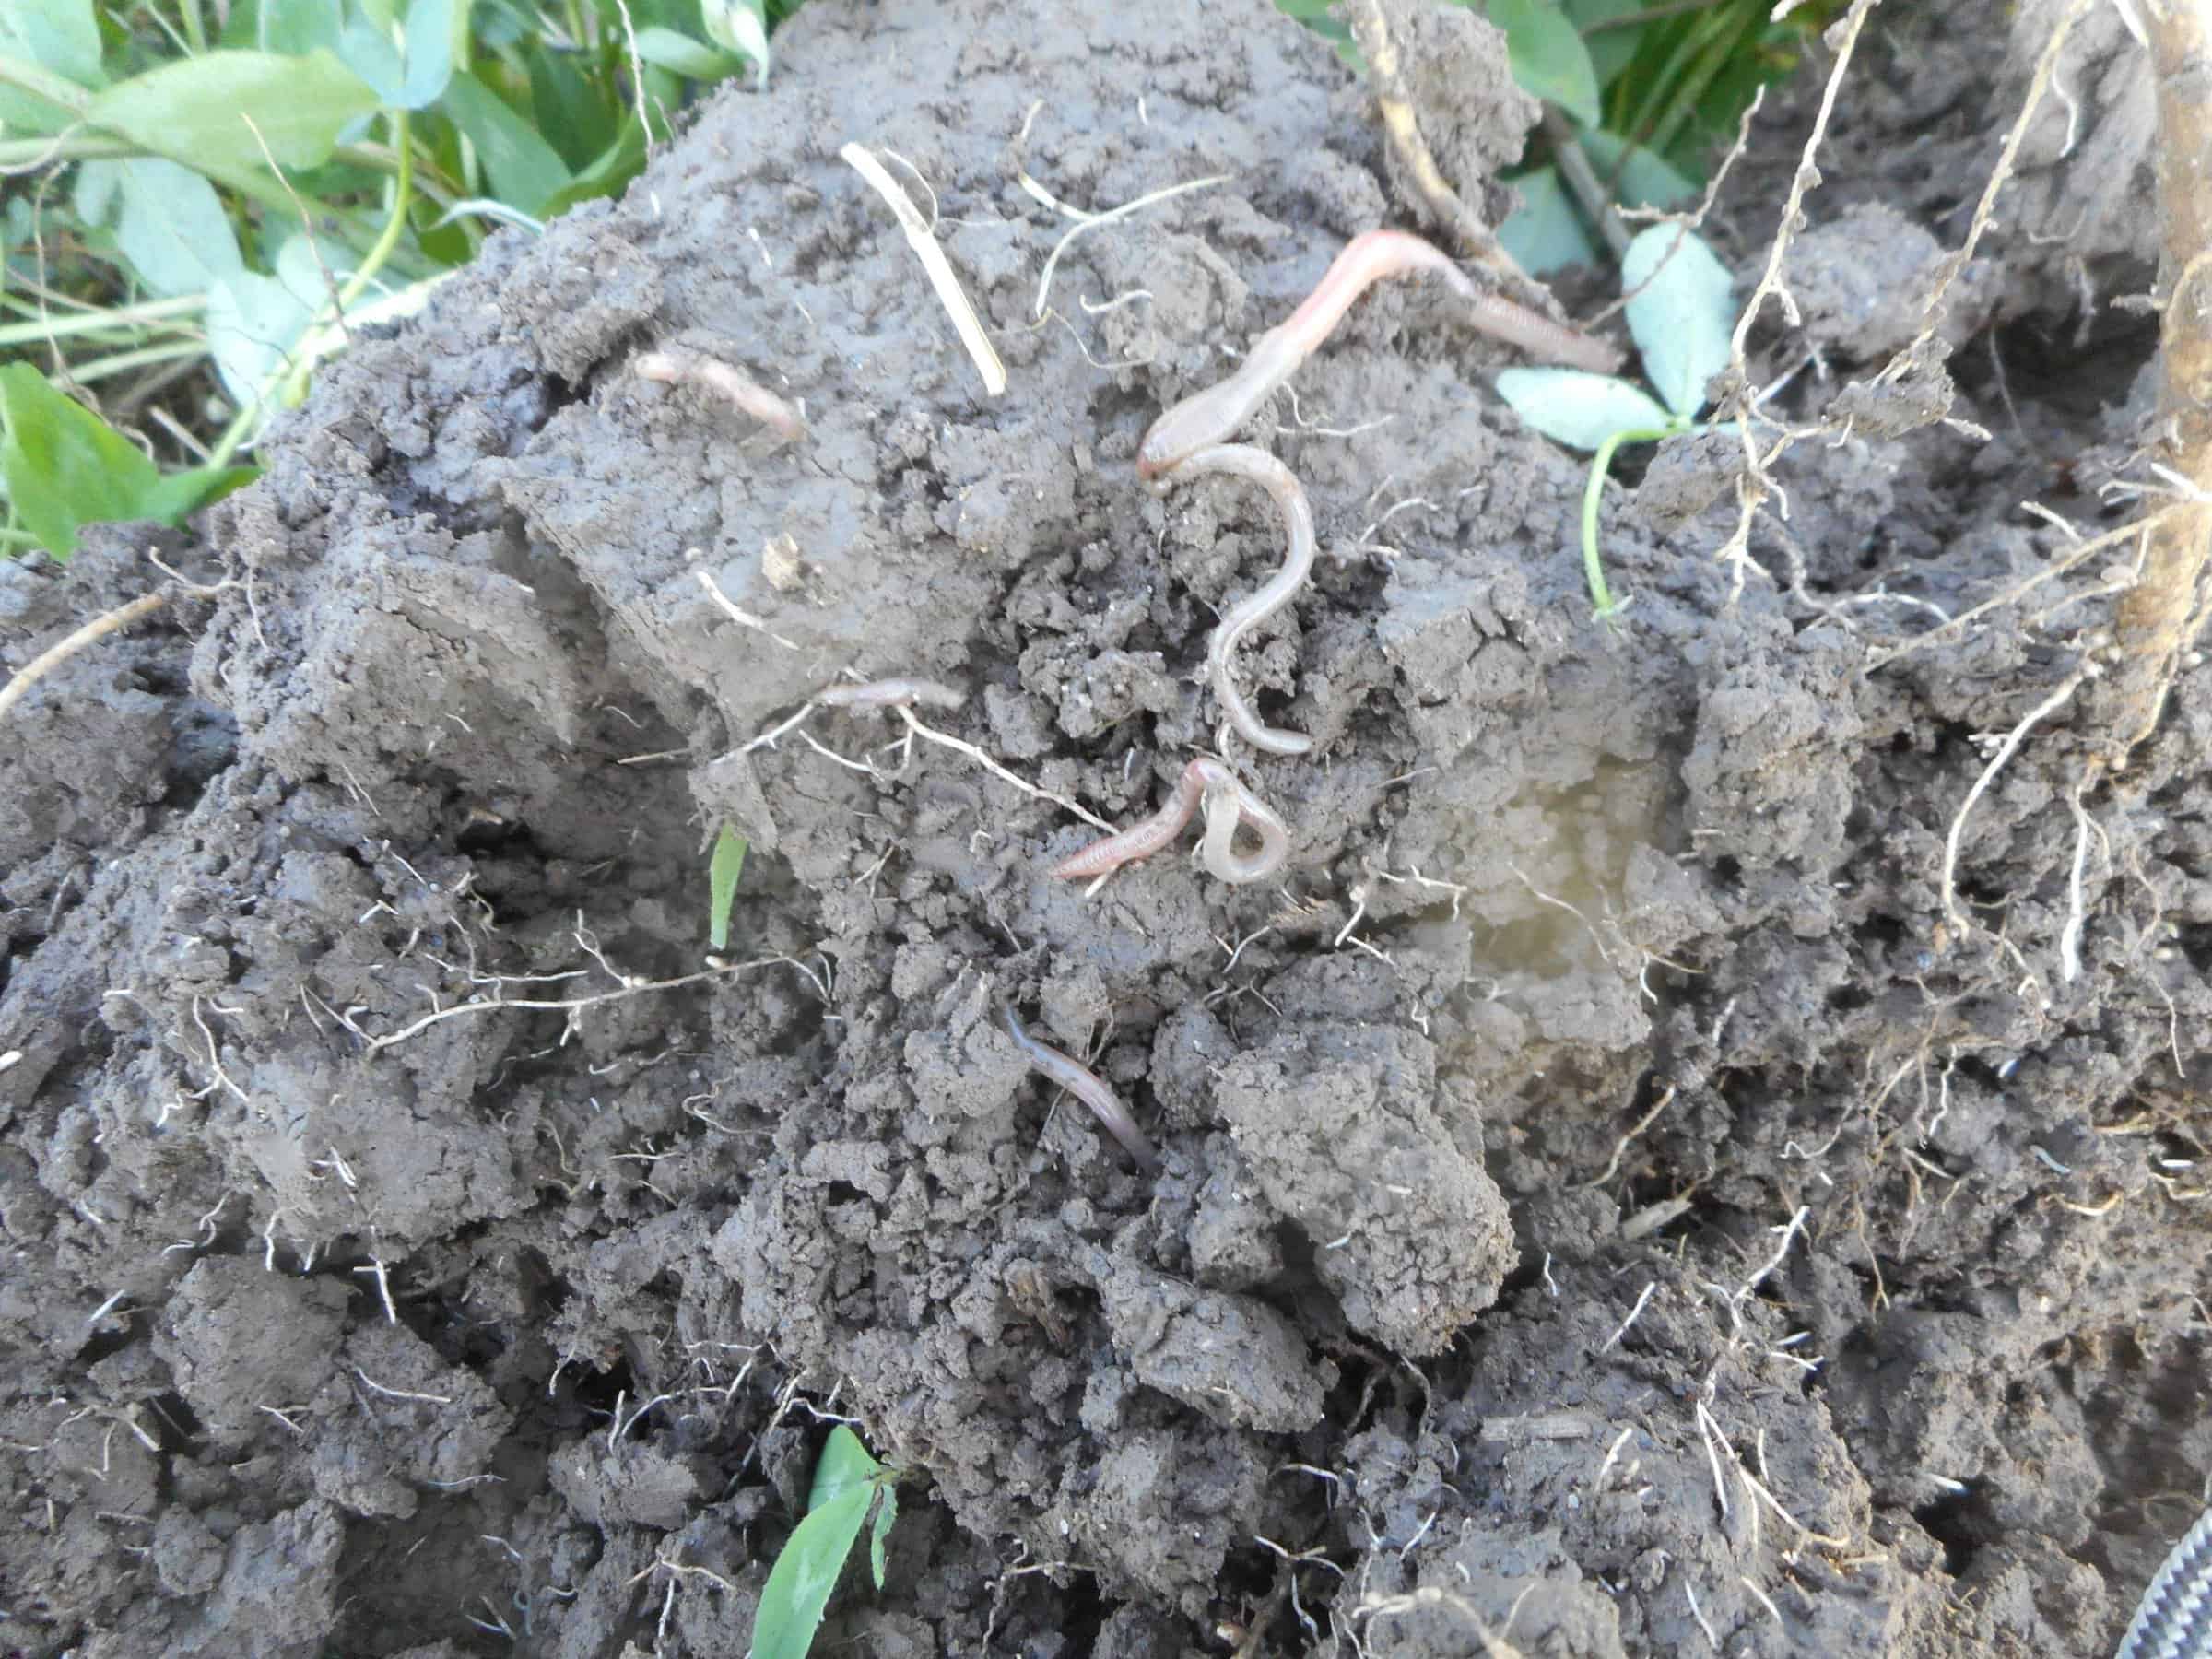 worms in soil clump